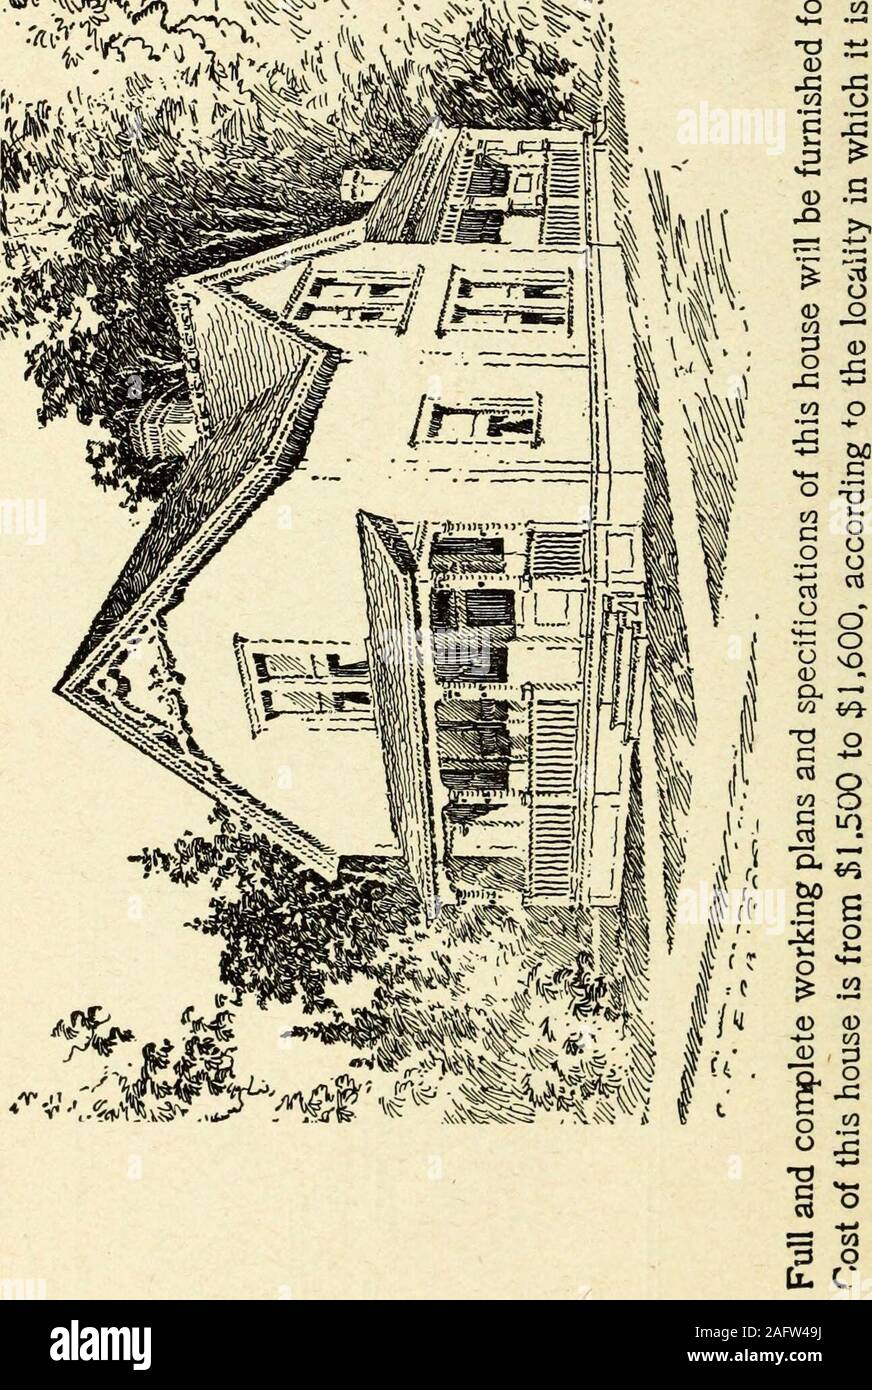 . Hodgson's low cost American homes; perspective views and floor plans of one hundred low and medium priced houses. O IS cU &gt; «u «J T3 M •a tr 0i » c c § ft, j- o o «?- C W d c ft « *- P O «4  o o • r &lt;D ft. 2 o w &lt; &lt;+- C J O &lt;U rv; ?3 » oo s * ° & H M tt Eh ^ ft S 6 43 O CQ O TJ G rt to f/) a rs as o 0- rt •*-i o &lt; ) o o V- Ci - C/) o q -c g in :g. Stock Photo